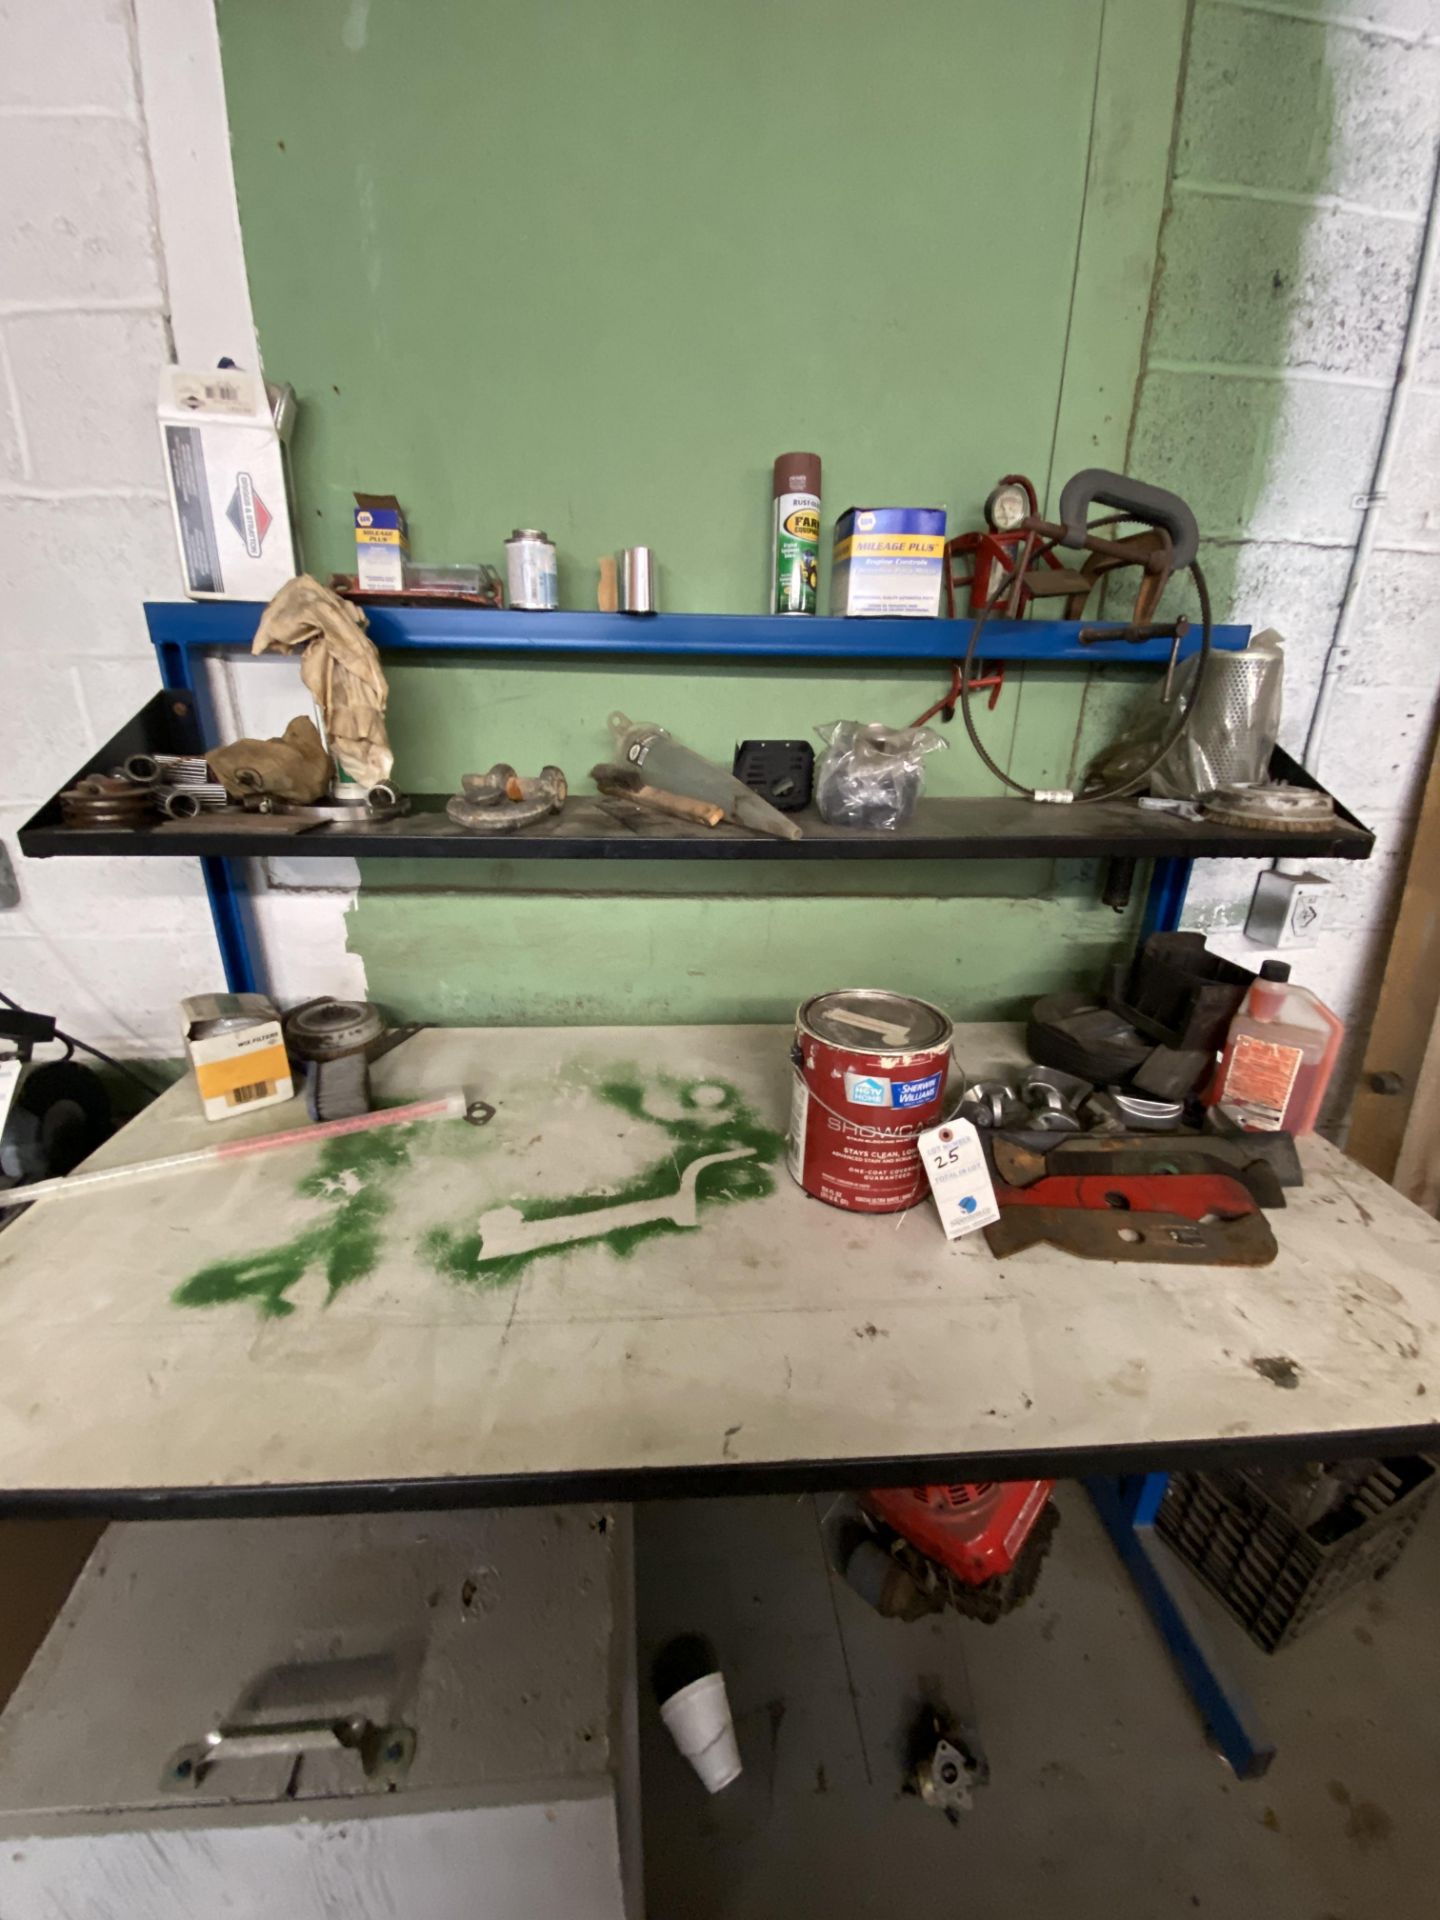 Work Bench w/ Contents, Shackle, Brush, Funnel, Table.